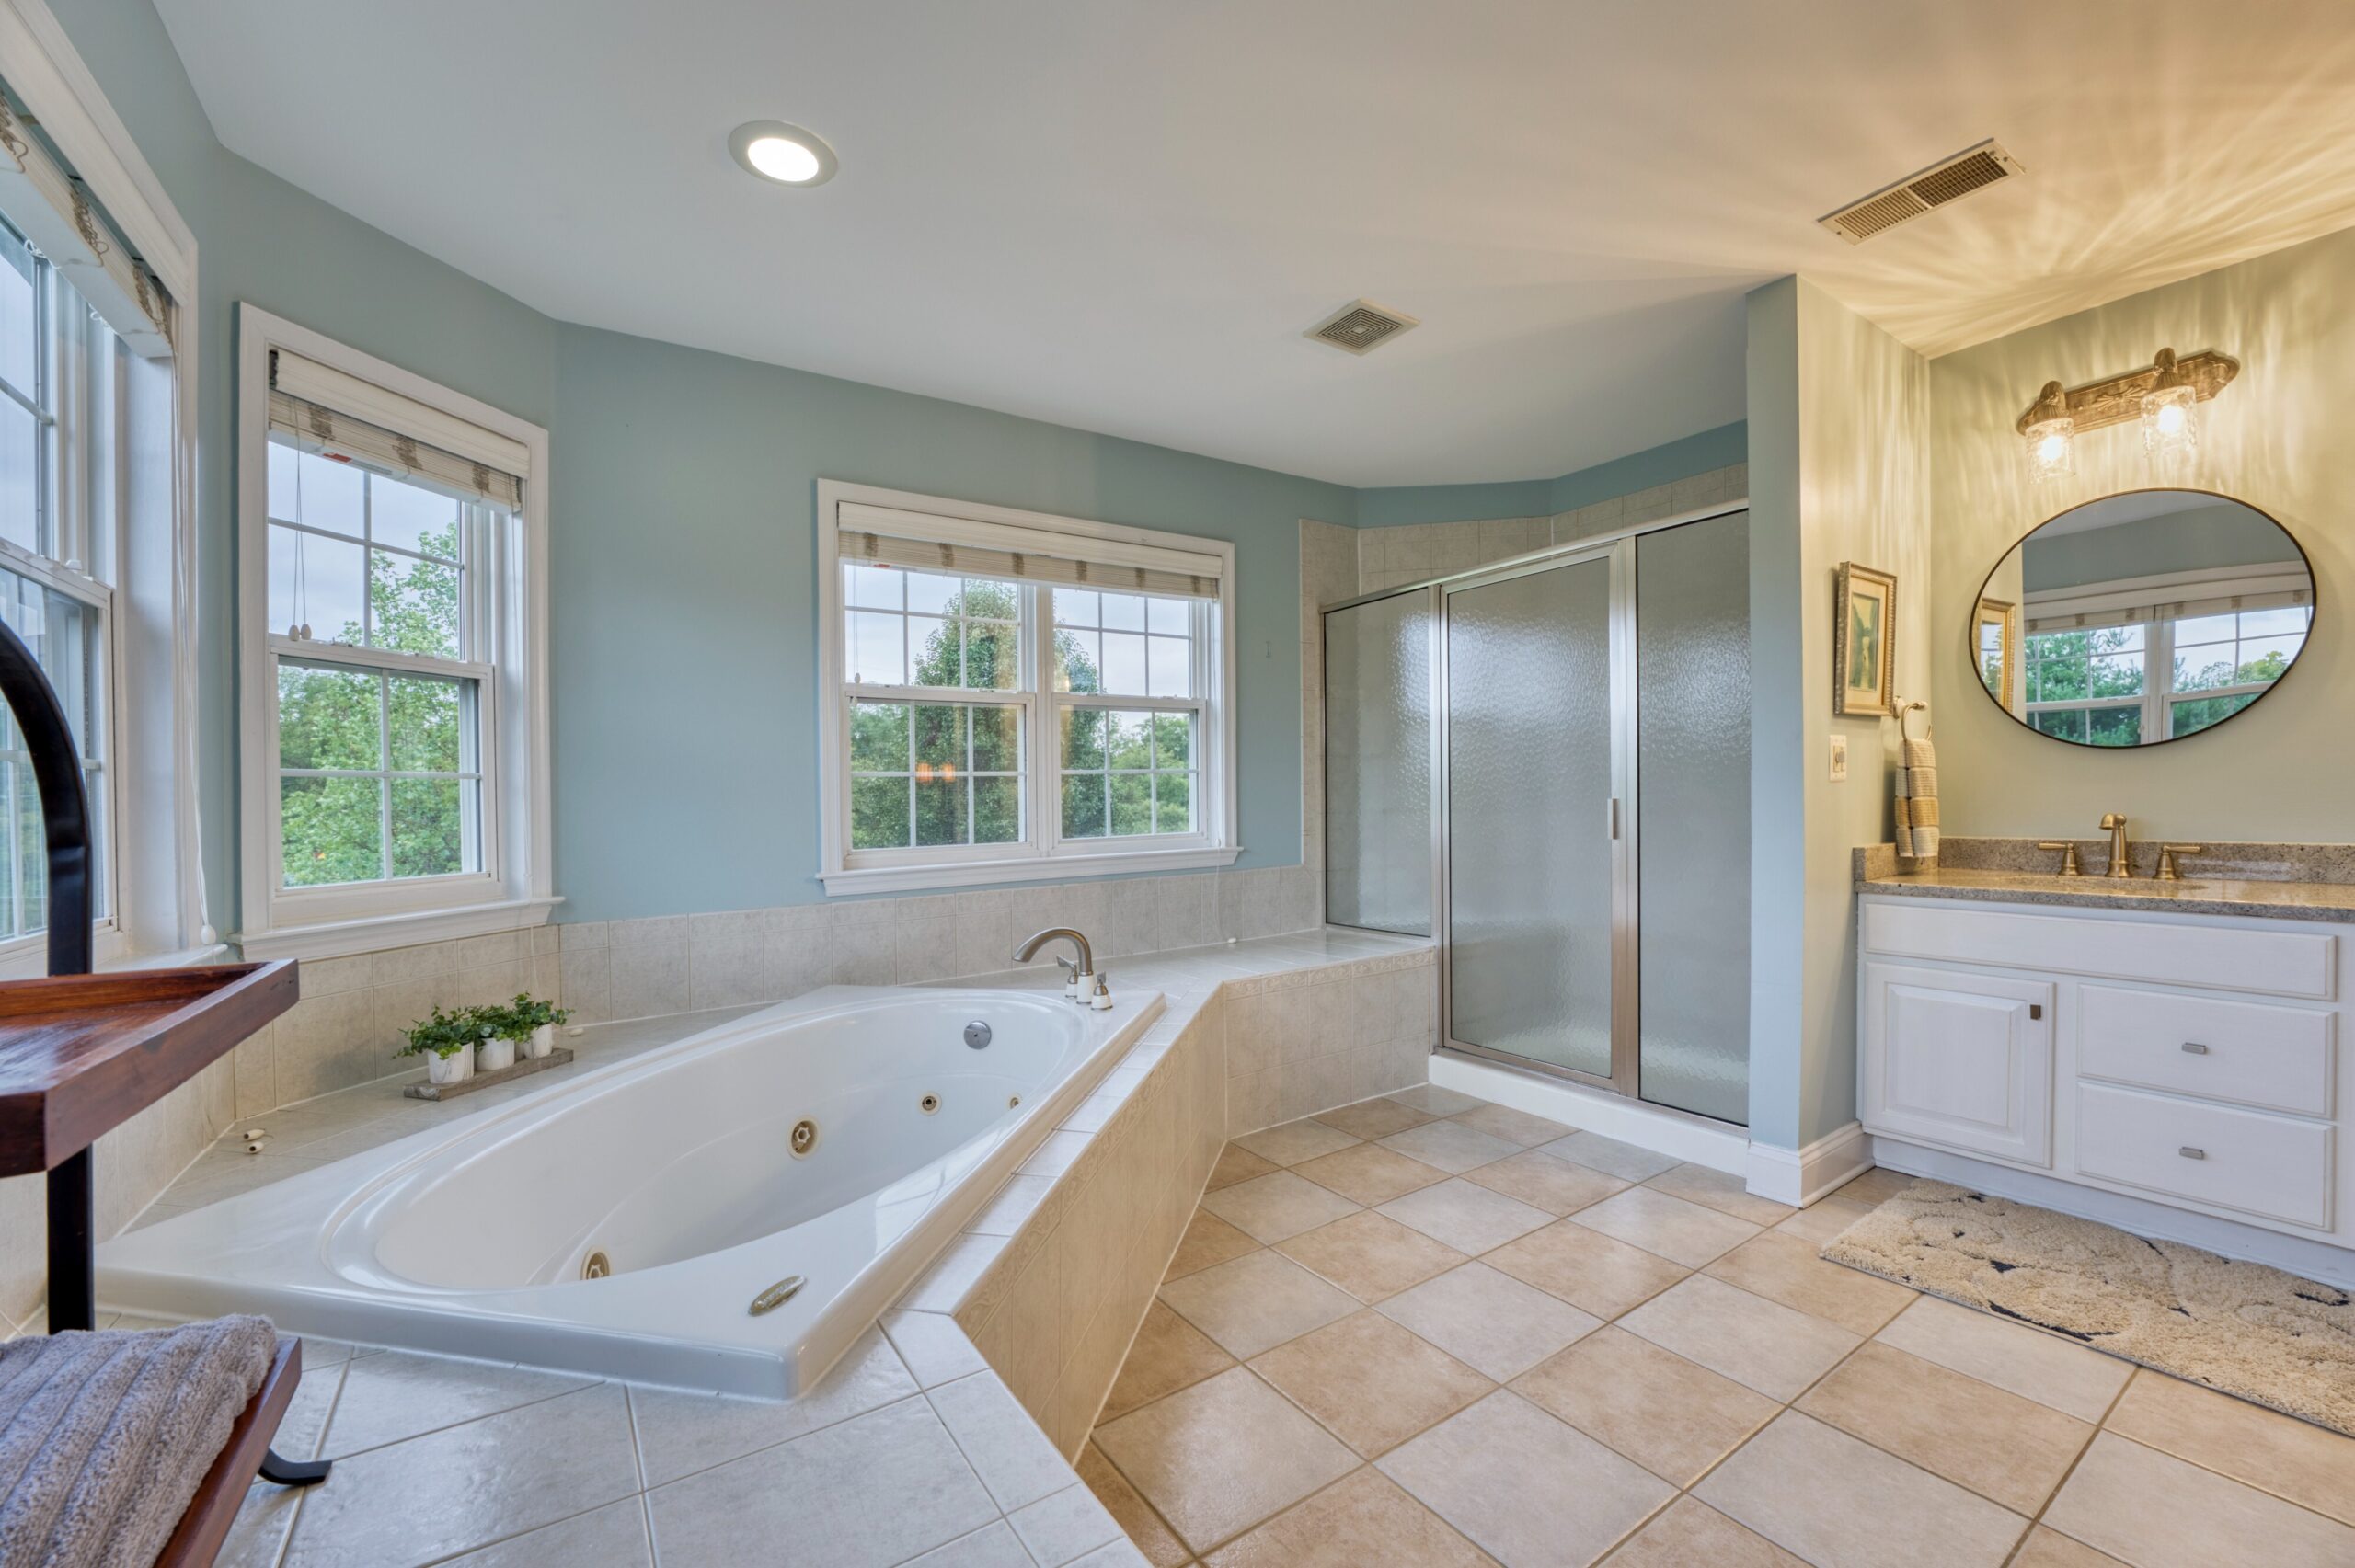 Professional interior photo of 16961 Heather Knolls Pl - showing the primary bathroom with large jacuzzi tub, large shower and double vanity